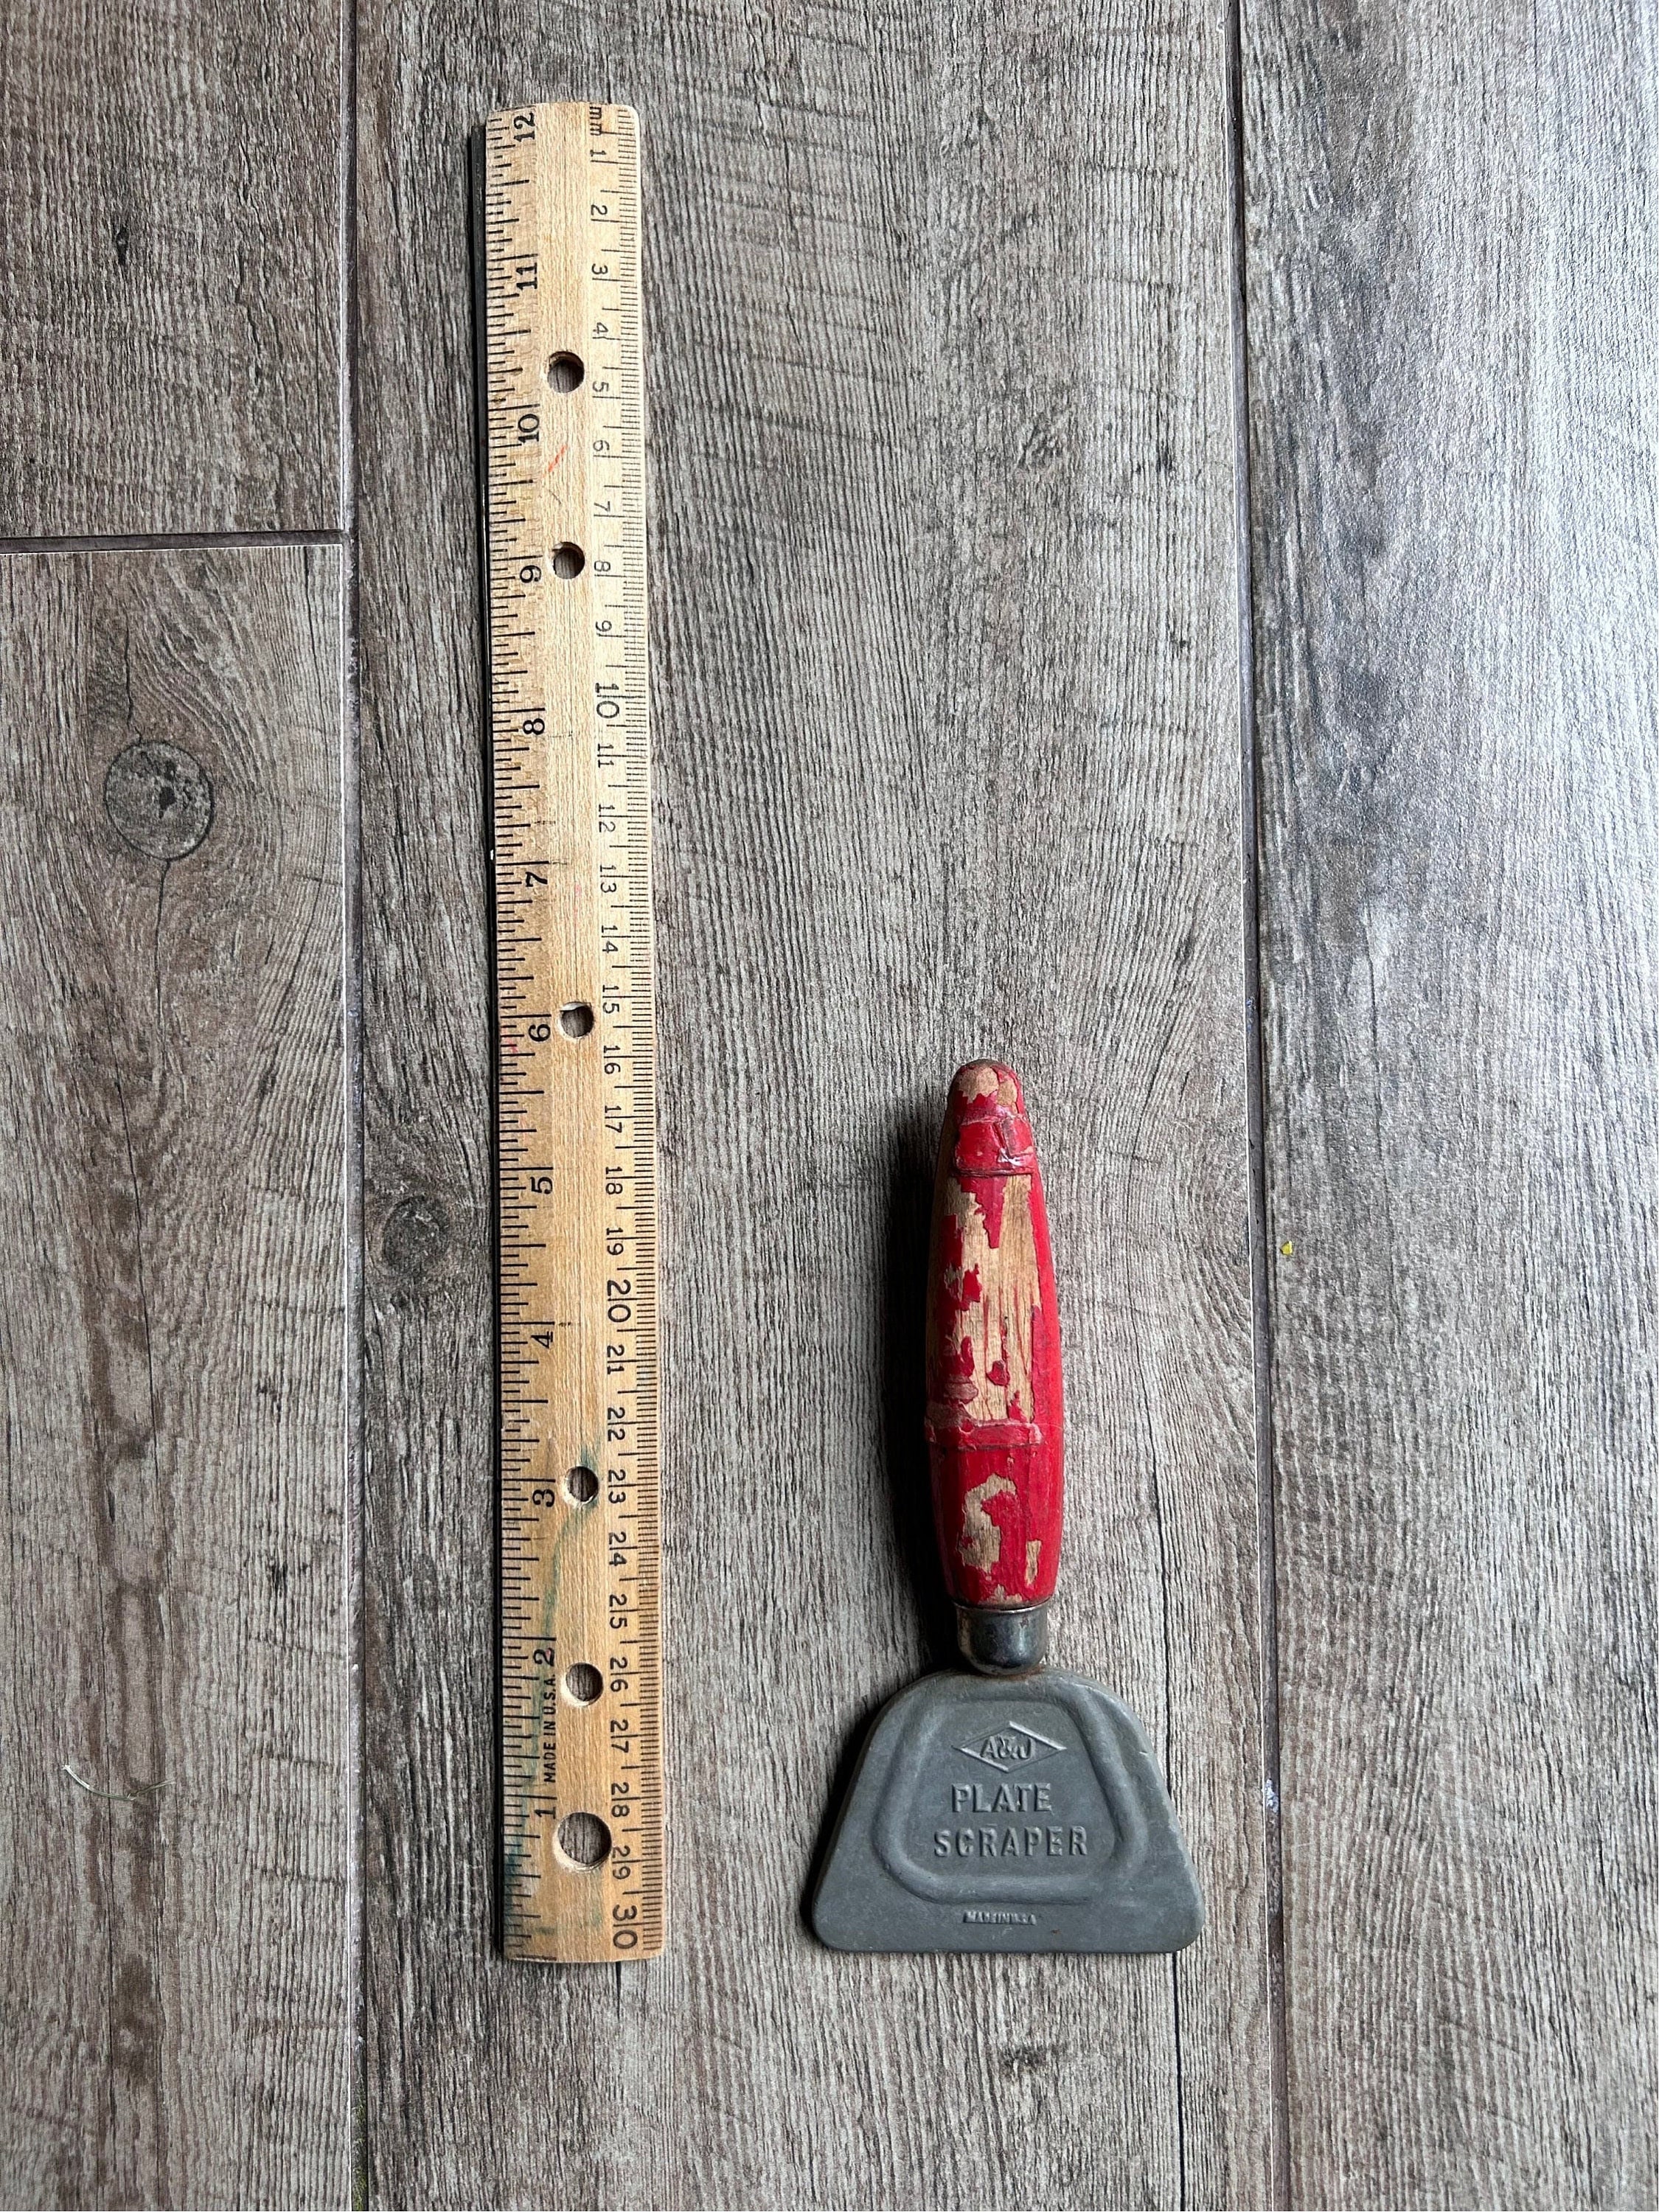 Vintage A & J Plate Scraper/Cleaner spatula Rubber RED Handle Farmhouse  AS-IS